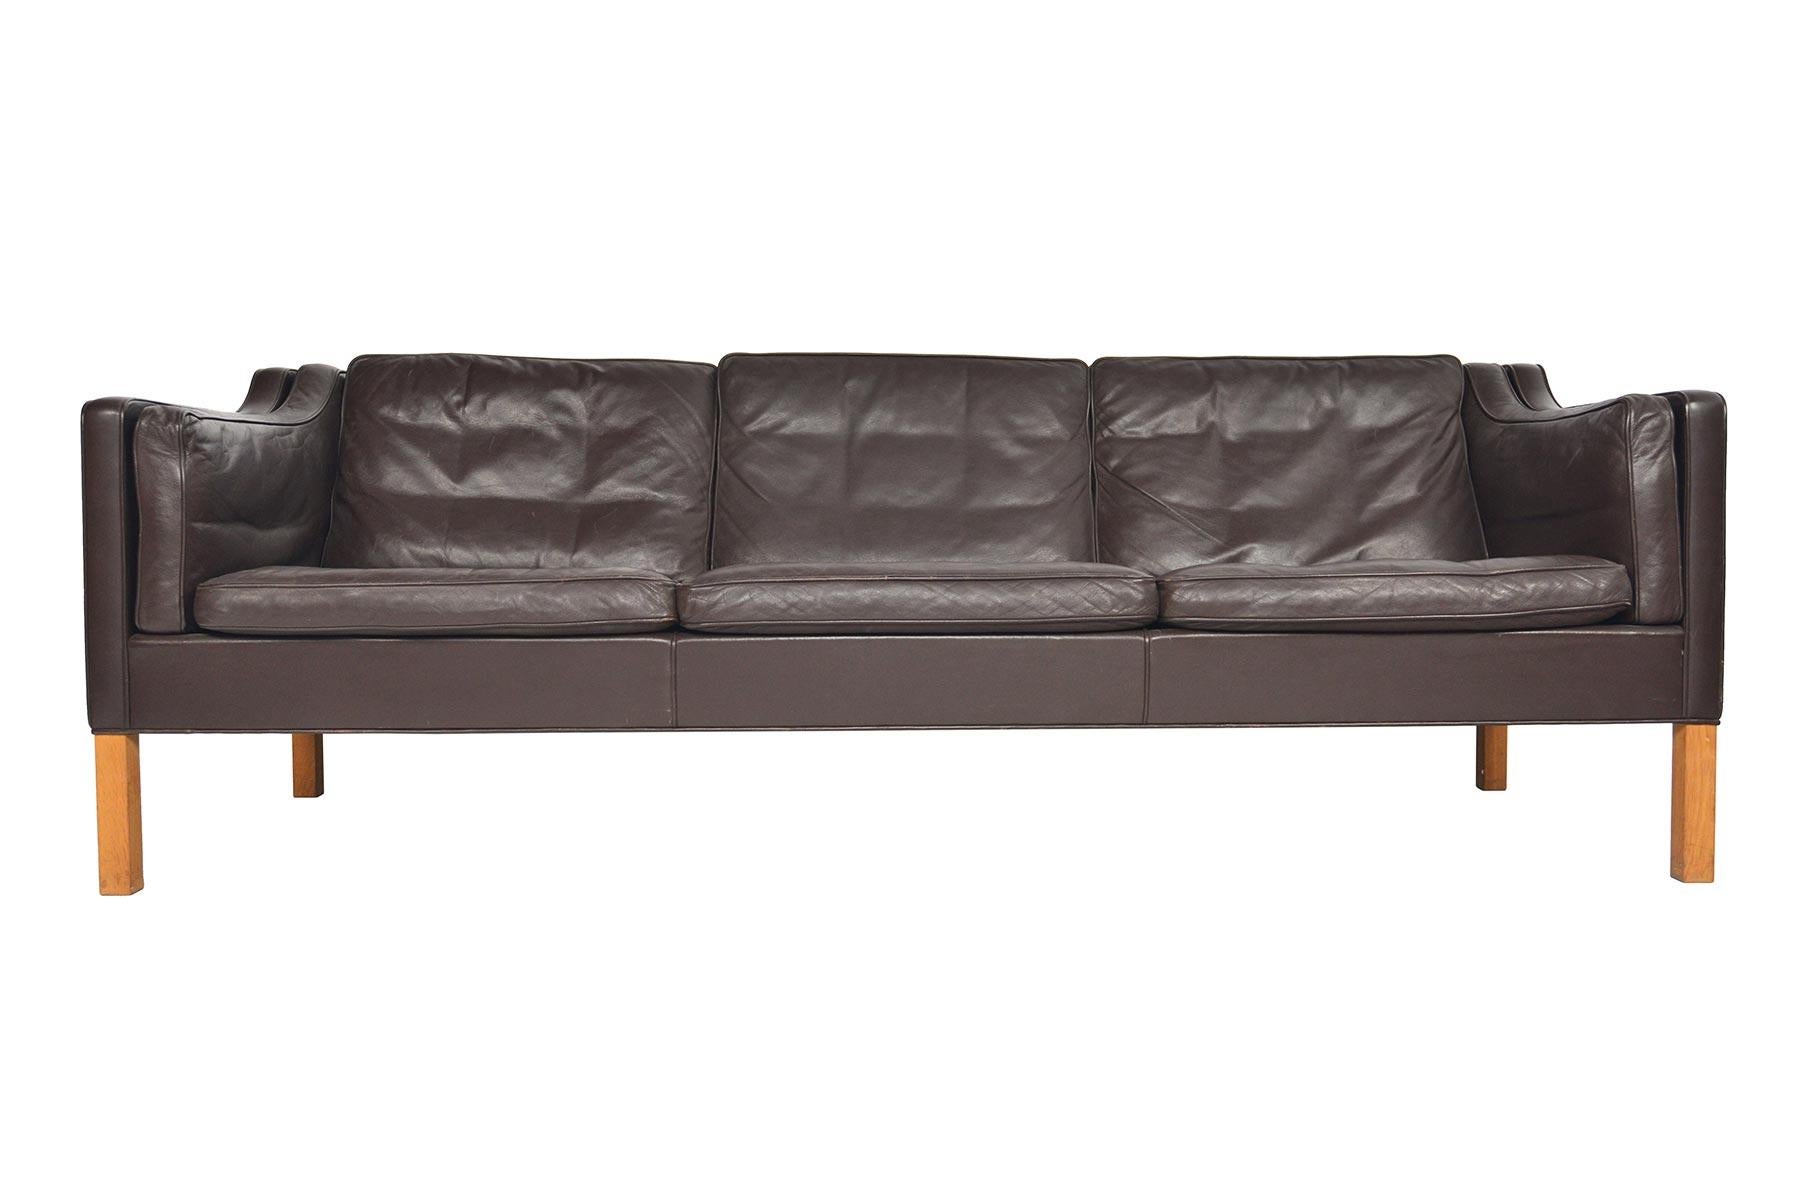 This Danish modern midcentury Model 2213 three-seat brown leather sofa was designed by Børge Mogensen for Frederica Furniture. A staple of modern decor, this piece set a new standard for simplistic, timeless design. This completely original sofa is